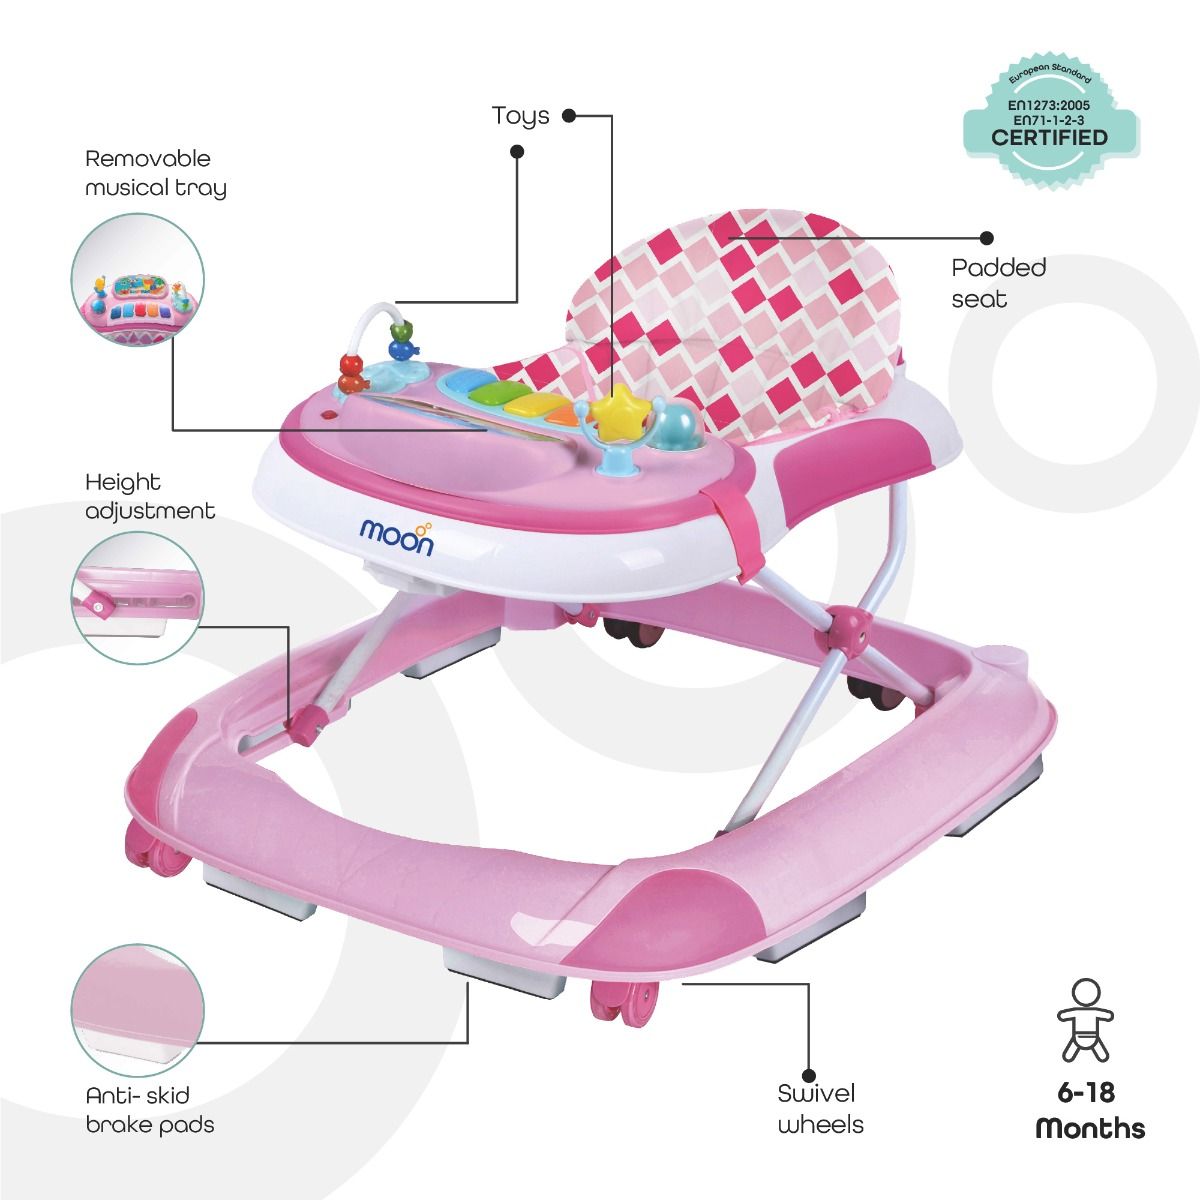 Moon - Pace Baby/Child Walker With Music & Toys - Pink, 6m